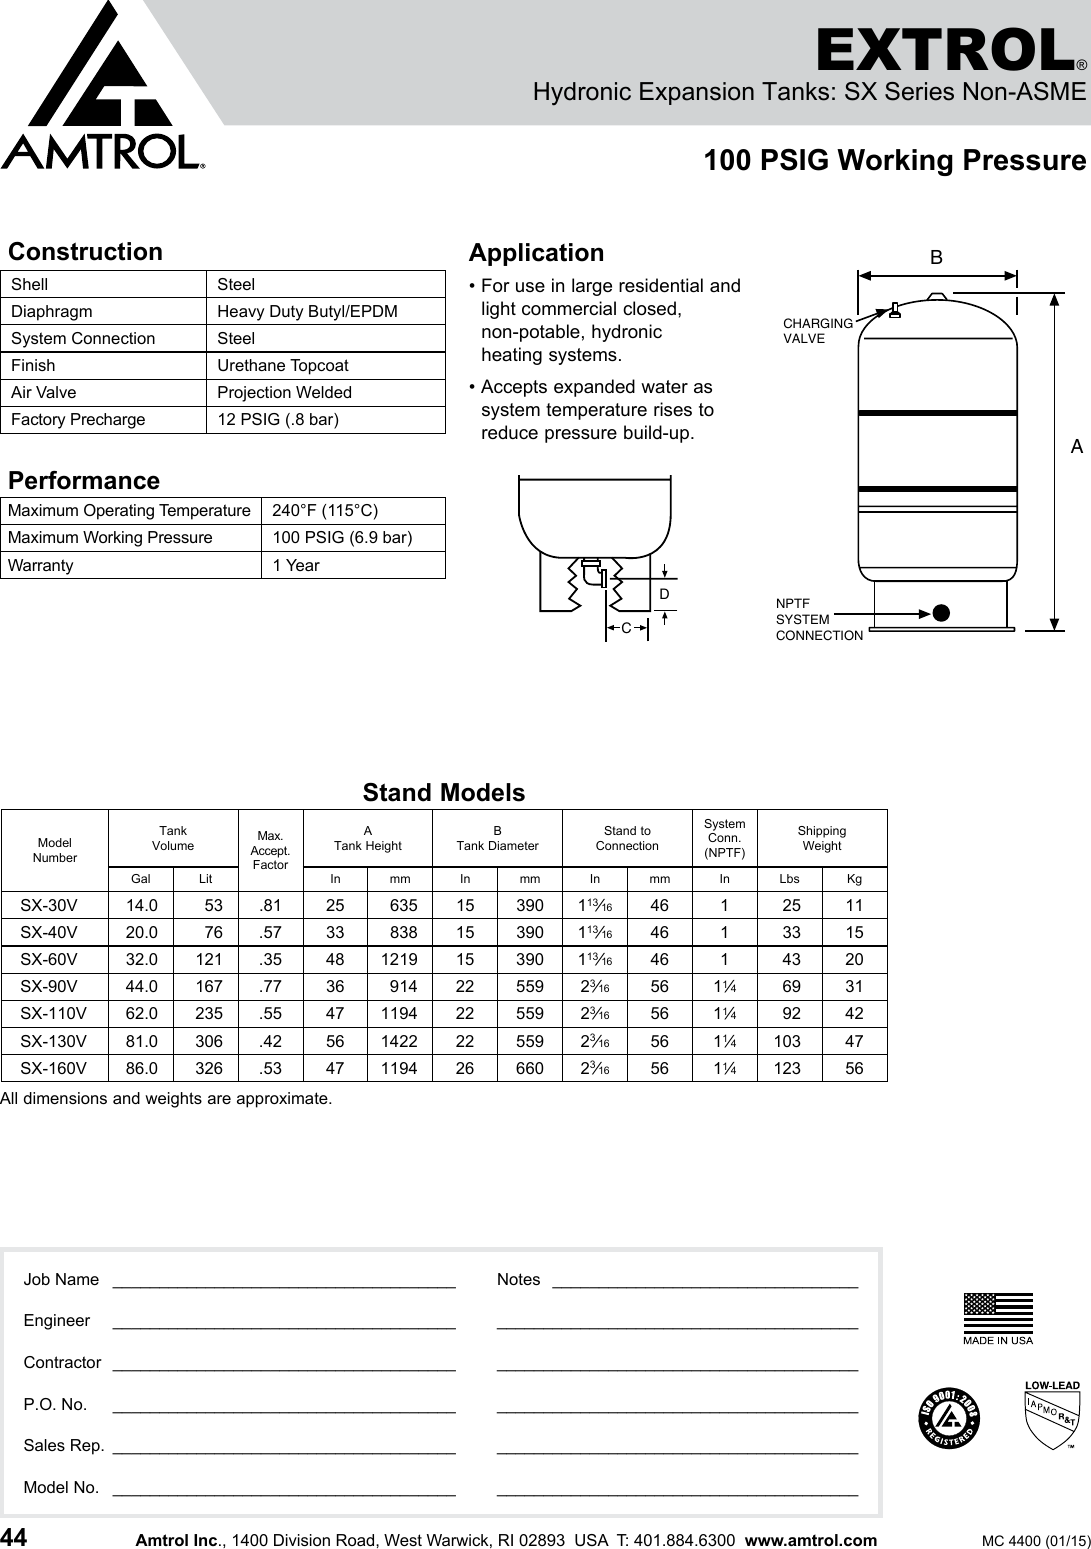 Page 1 of 1 - 551506 3 Amtrol Extrol SX-40V Expansion Tank Specifications